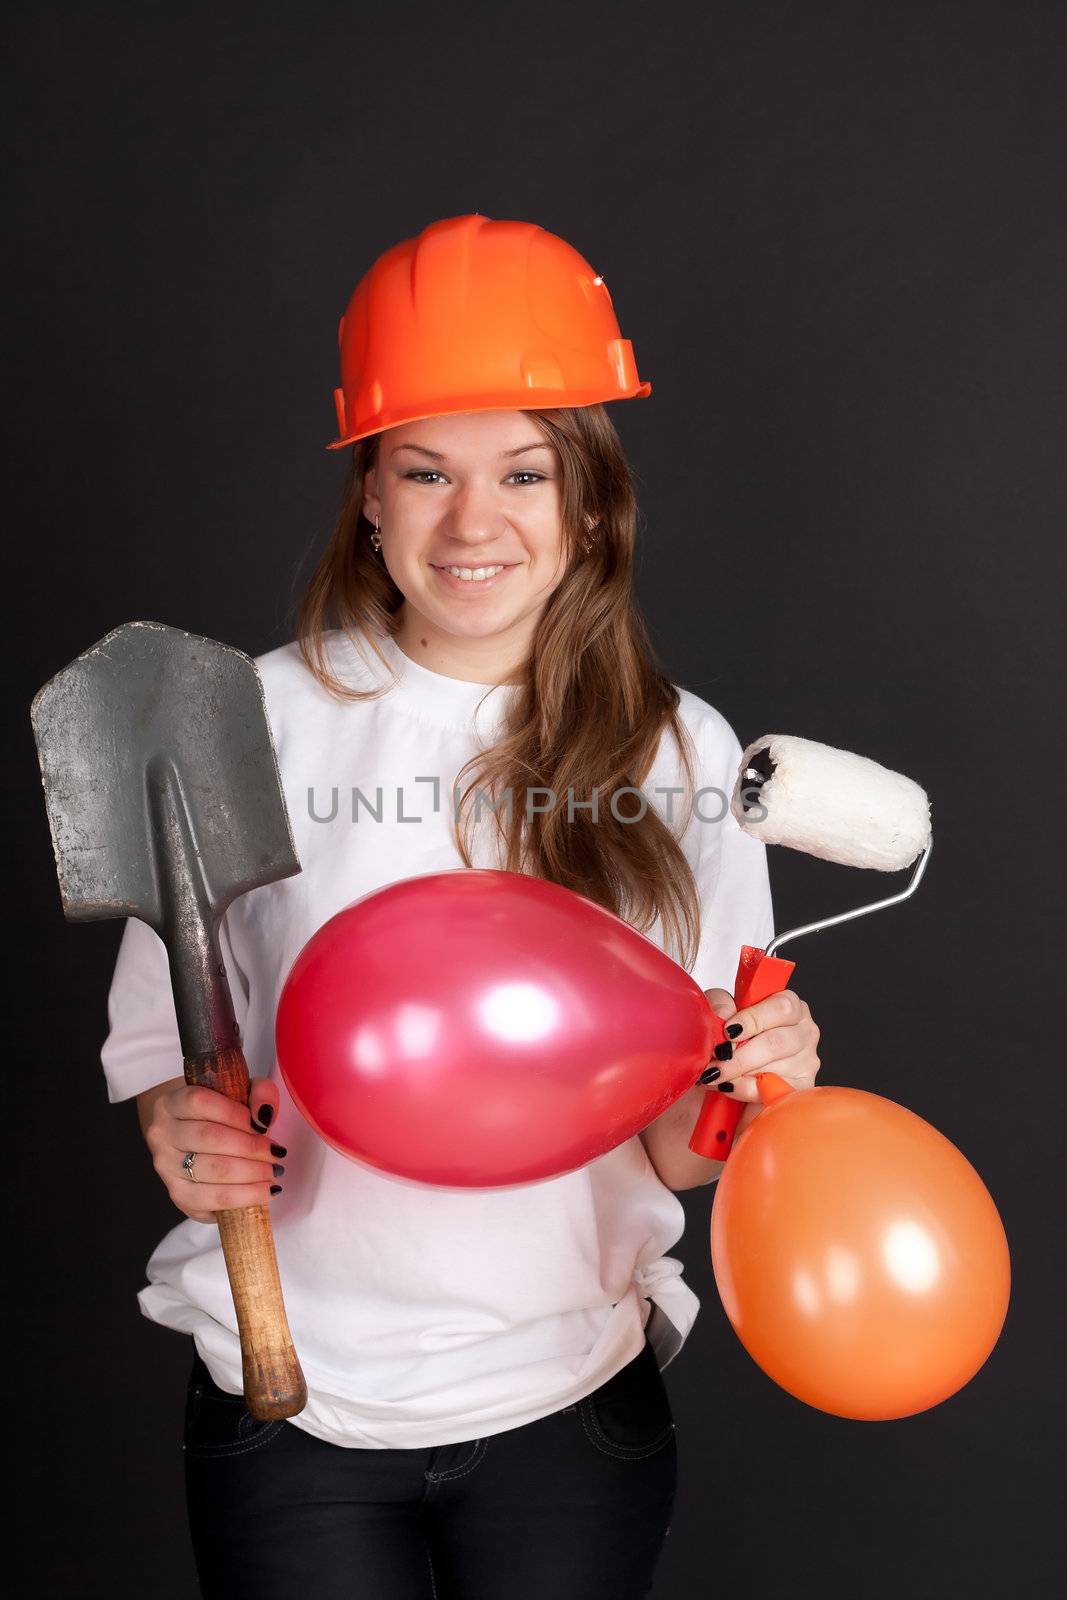 The girl in the helmet with balls and a shovel by victosha